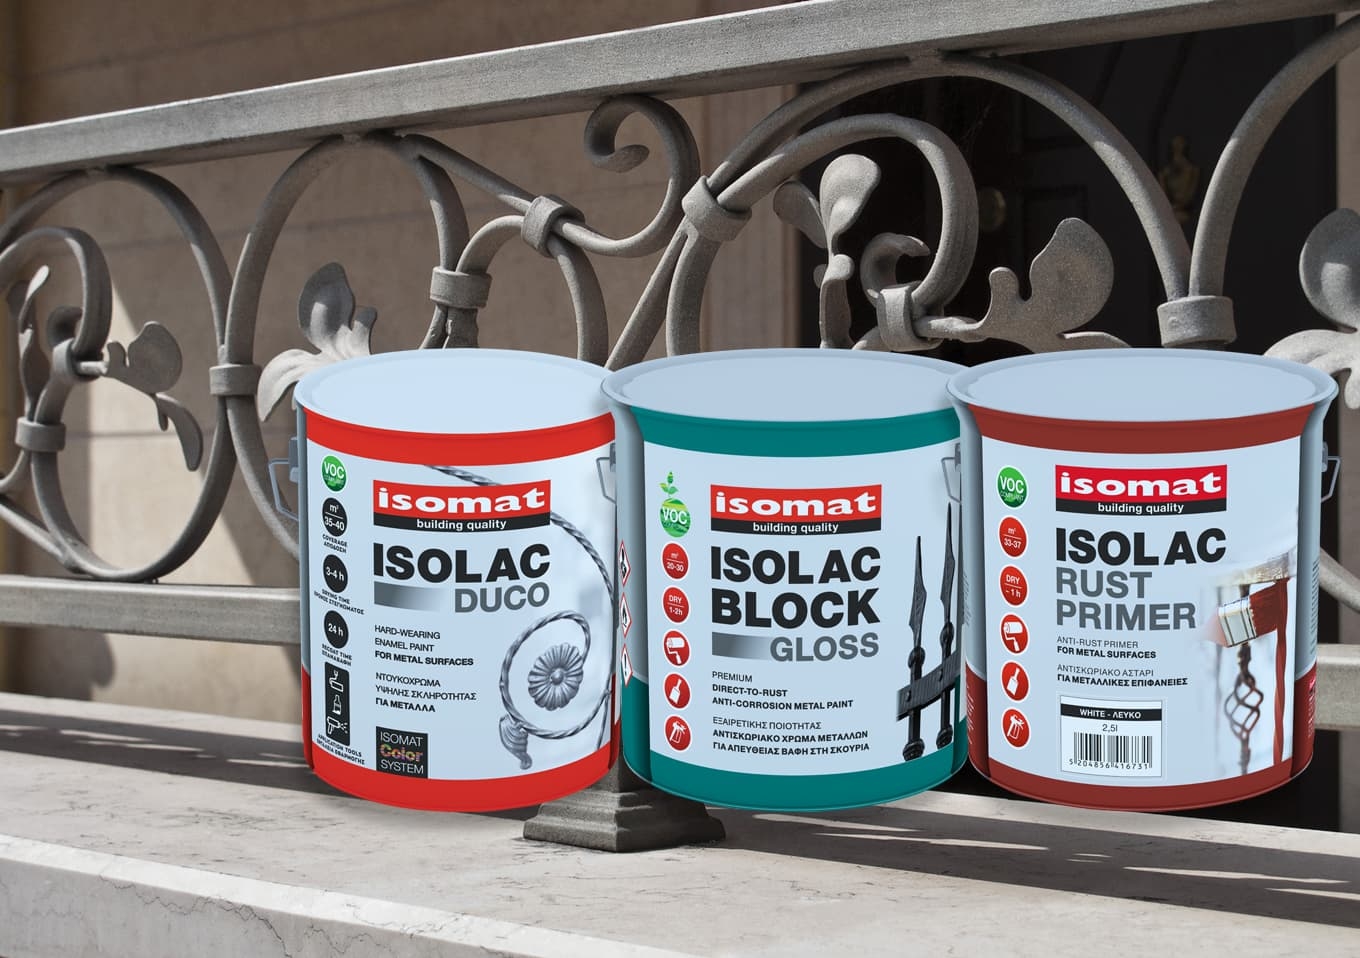 ISOLAC-DUCO GLOSS, ISOLAC-DUCO SATIN, ISOLAC-RUST PRIMER, ISOLAC-BLOCK GLOSS